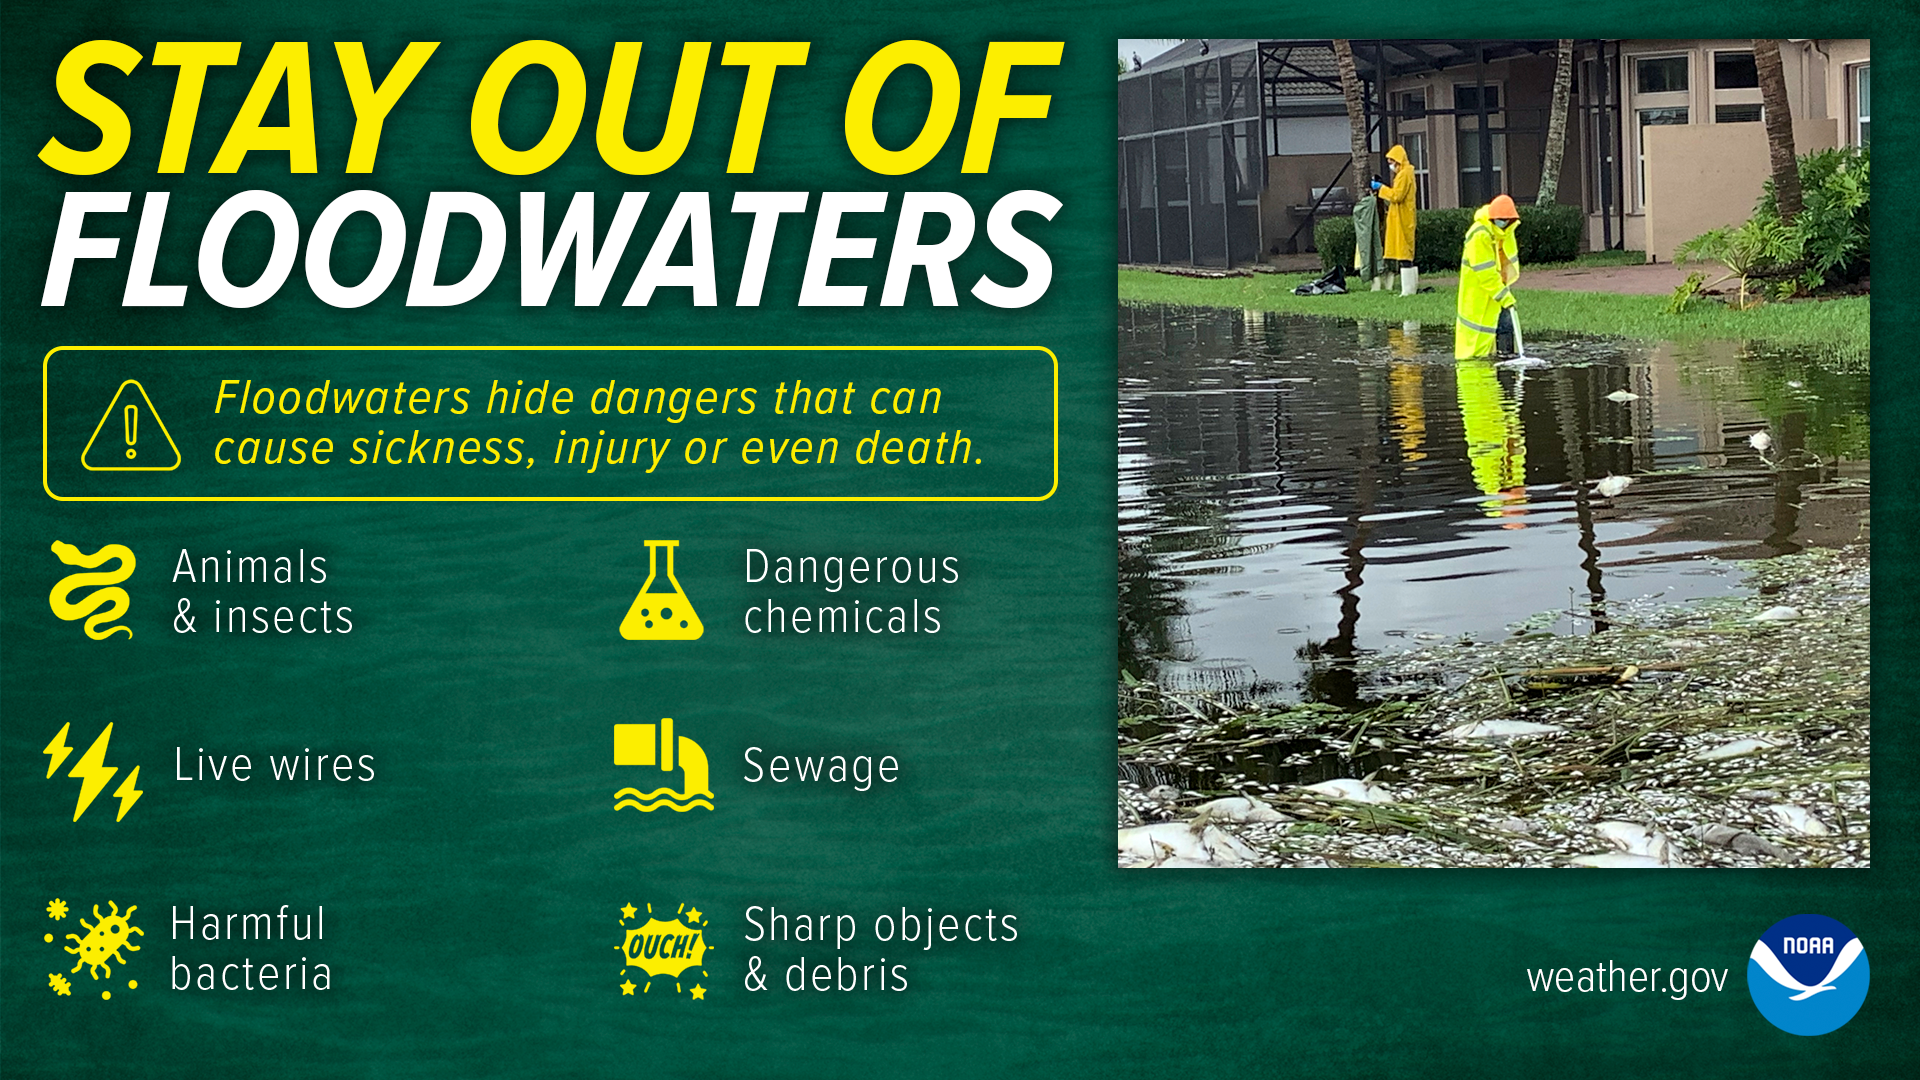 Stay out of floodwaters. Floodwaters hide dangers that can cause sickness, injury or even death, including animals and insects, live wires, harmful bacteria, dangerous chemicals, sewage, and sharp objects and debris.